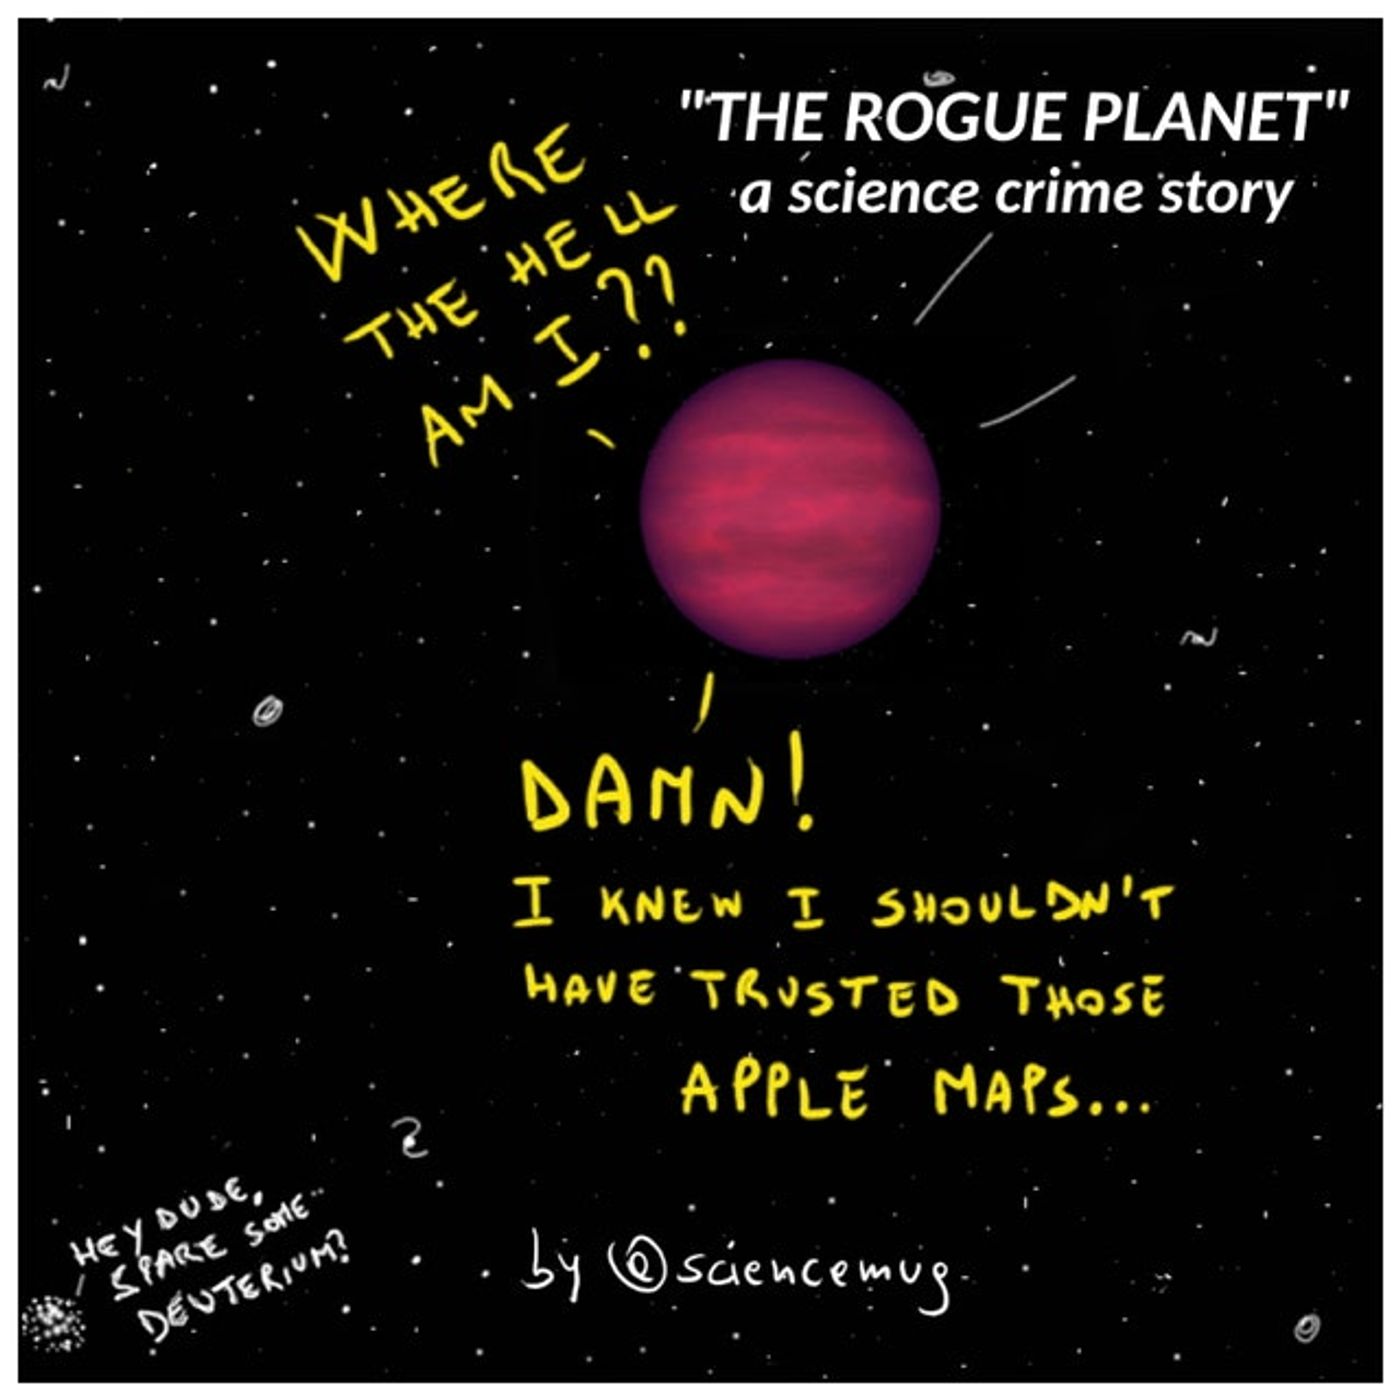 The Rogue Planet: a science "crime" story